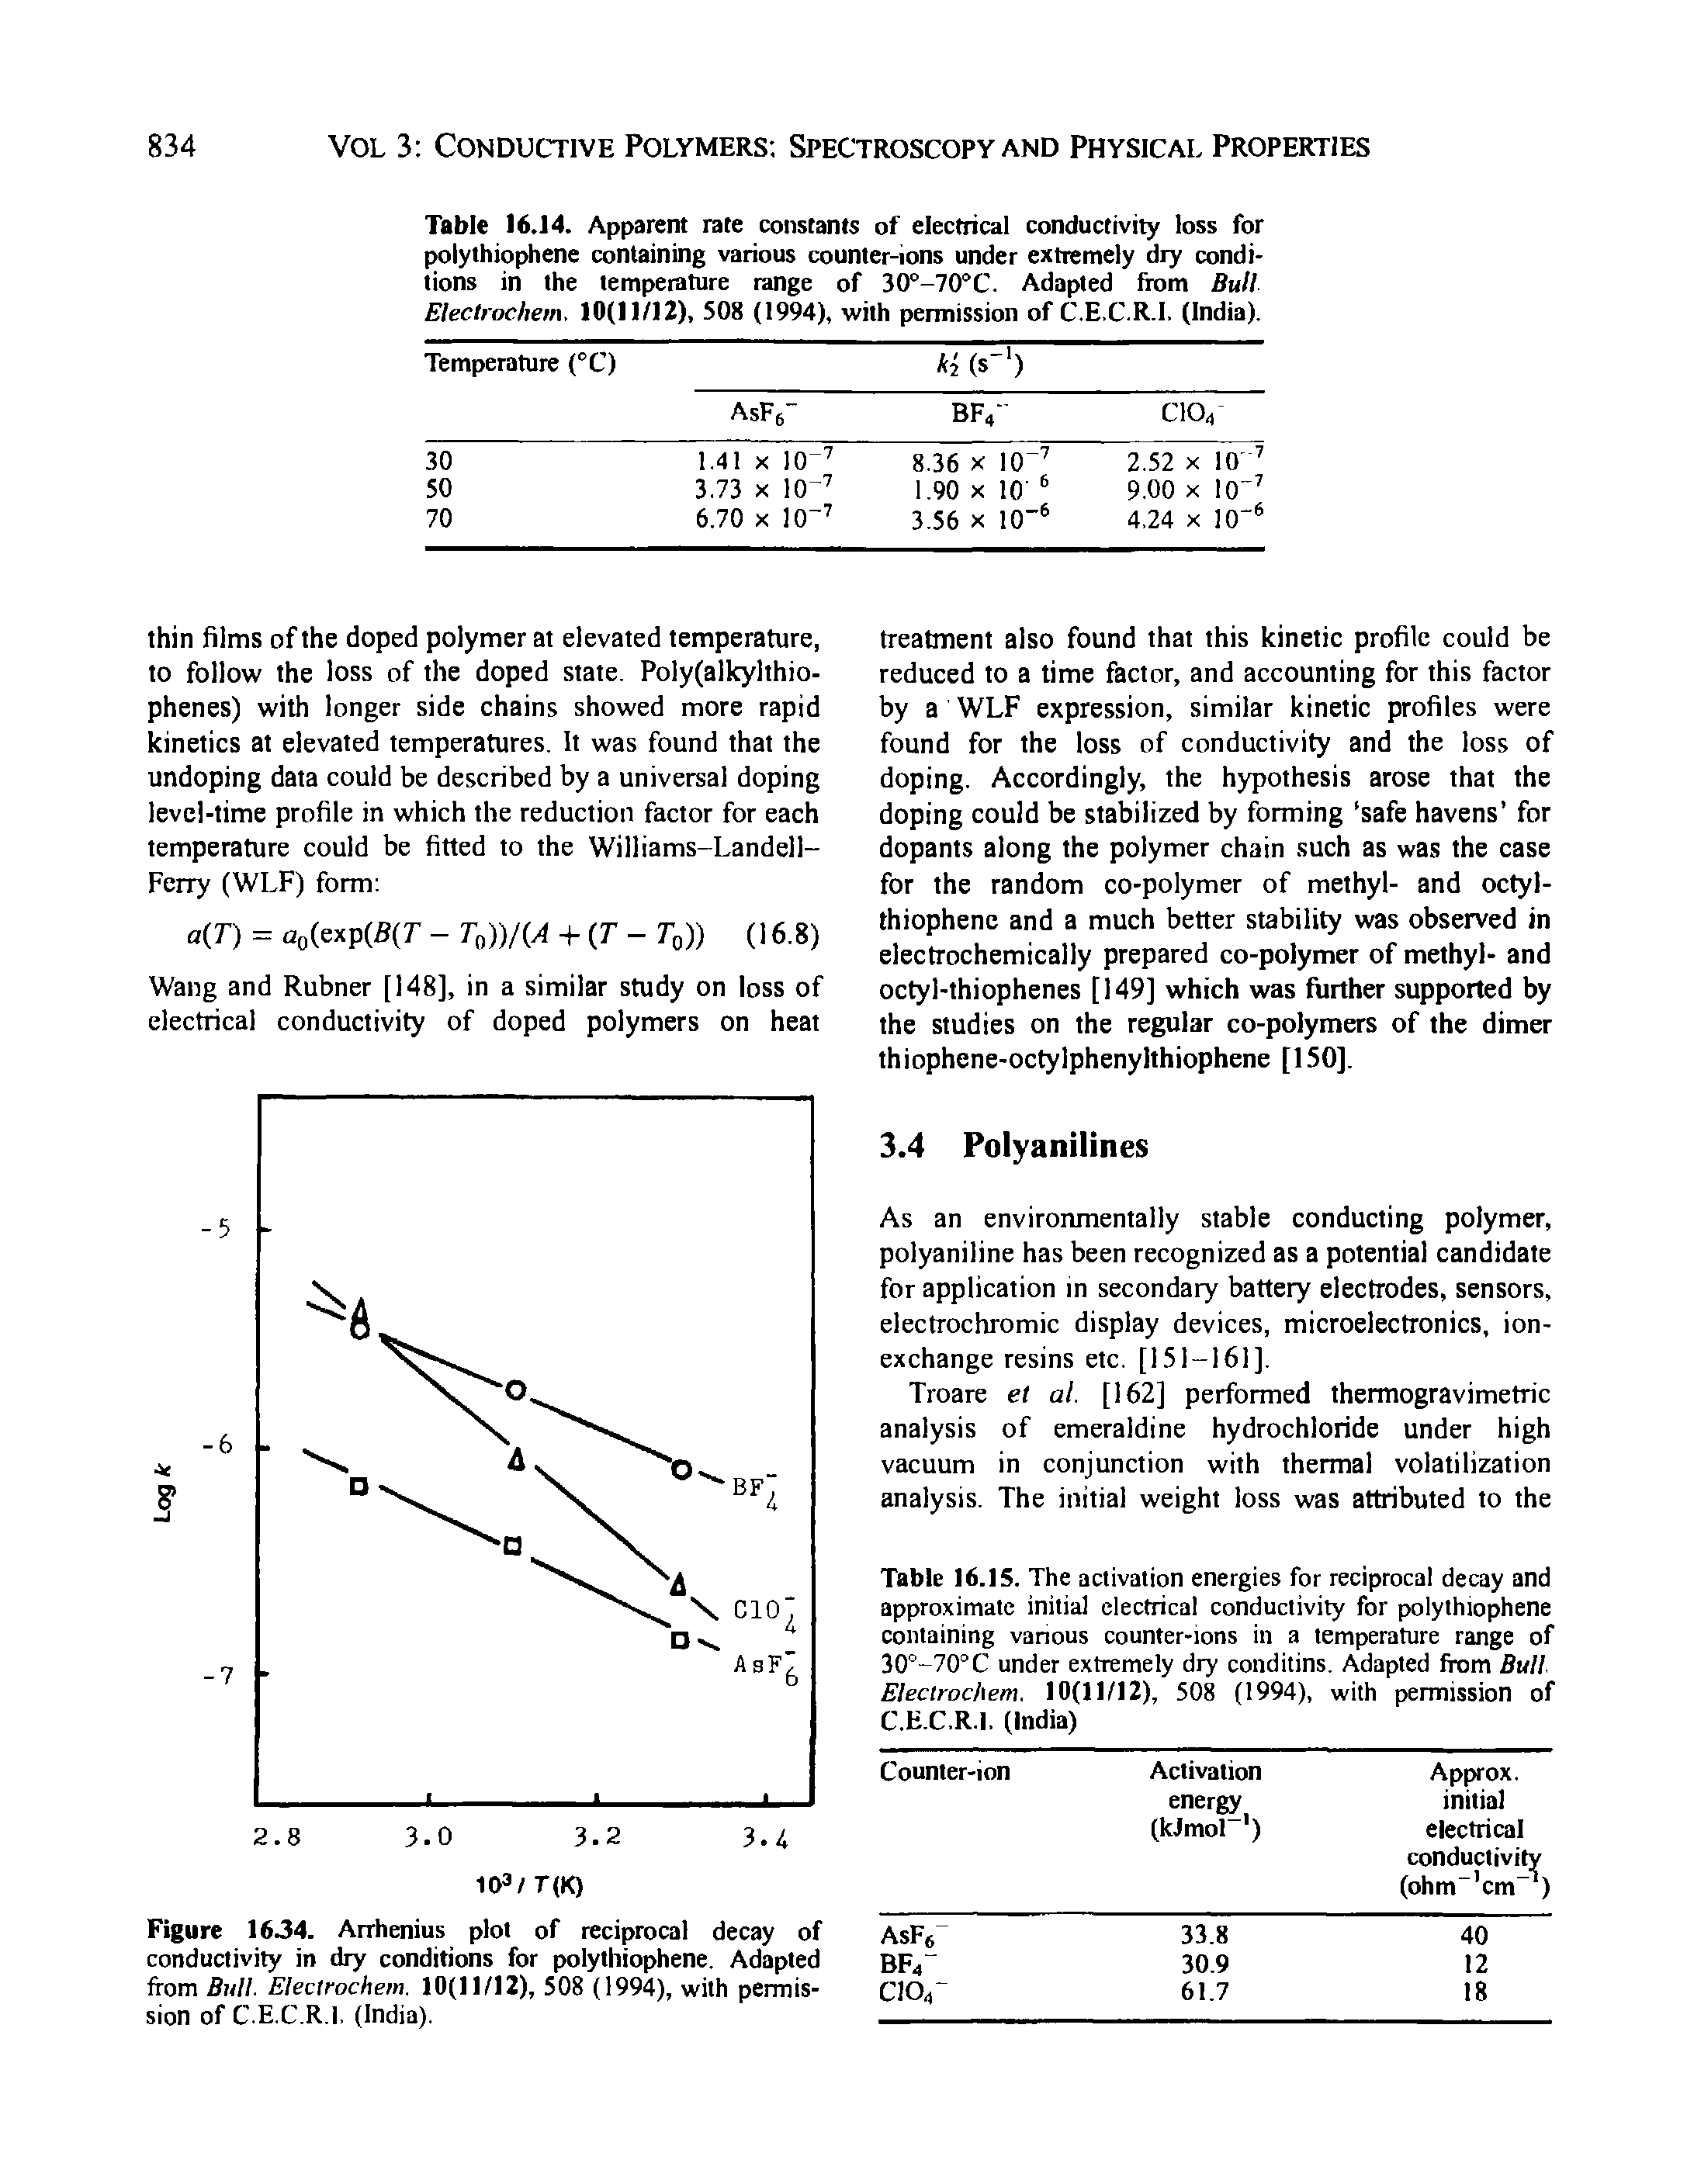 Table 16.14. Apparent rate constants of electrical conductivity loss for polythiophene containing various counter-ions under extremely dry conditions in the temperature range of iOF-lO C. Adapted from Bull Electrochem. 10(11/12), 508 (1994), with permission of C.E.C.R.I. (India).